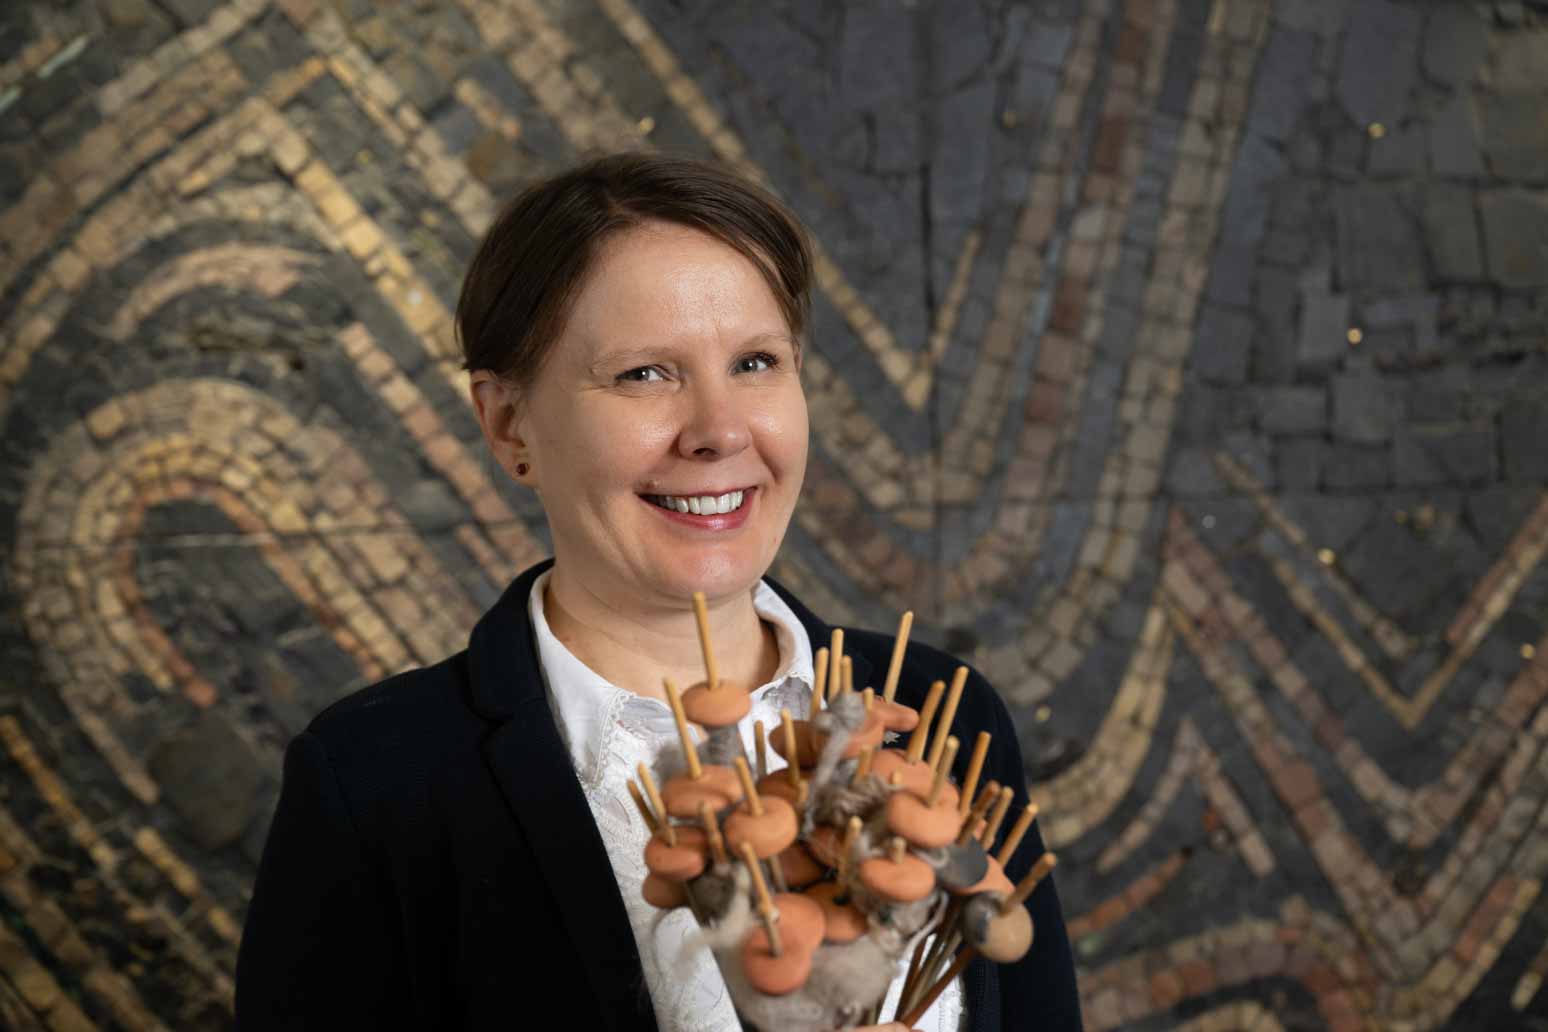 Archaeologist, Dr Susanna Harris standing in front of a swirly mosaic holding a bunch of round ceramic weights on sticks. These are replica spindles, tools used to twist fibres into yarn.